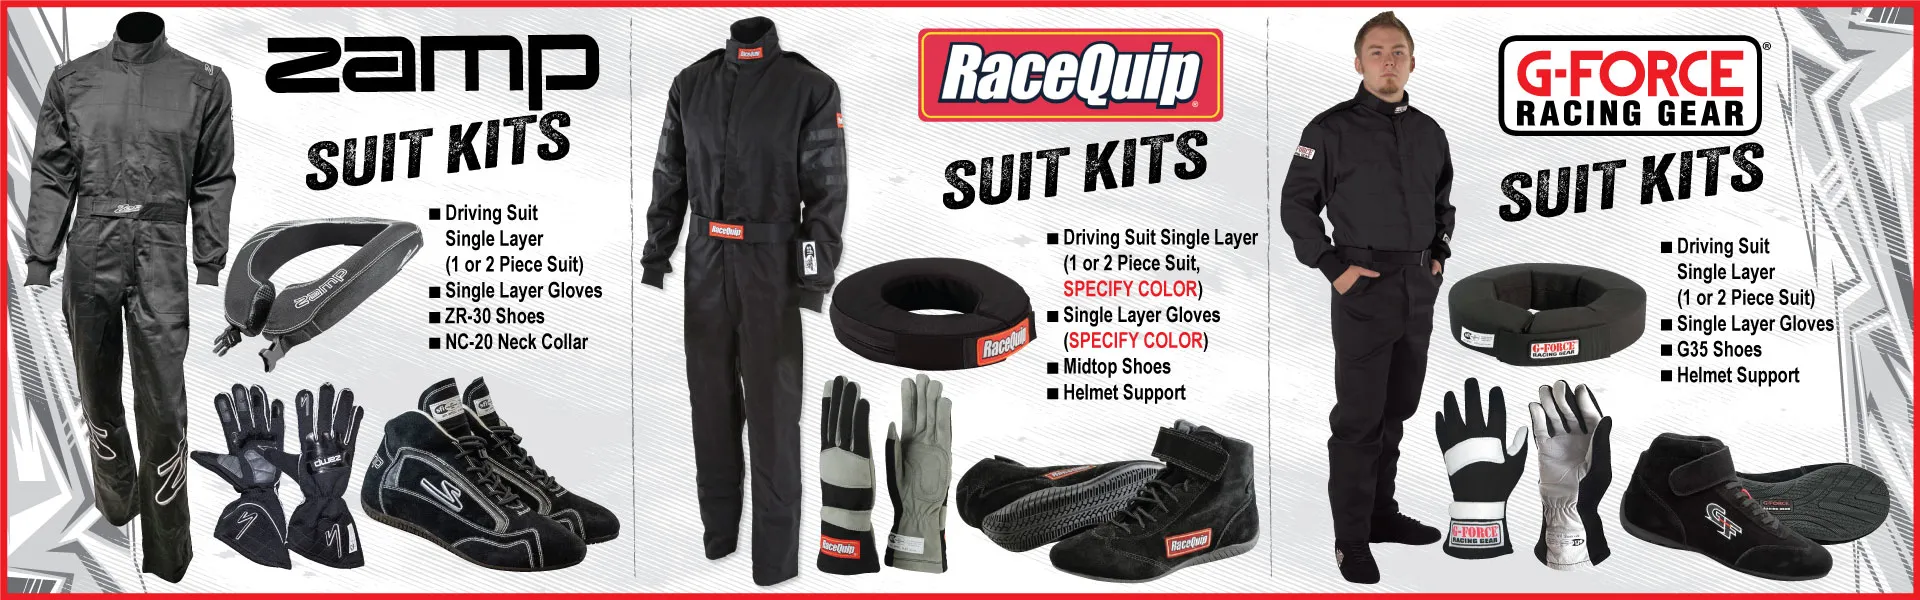 Suit kits featuring G-Force, RaceQuip, or Zamp products with 1pc or 2pc single layer suits available at Day Motor Sports.